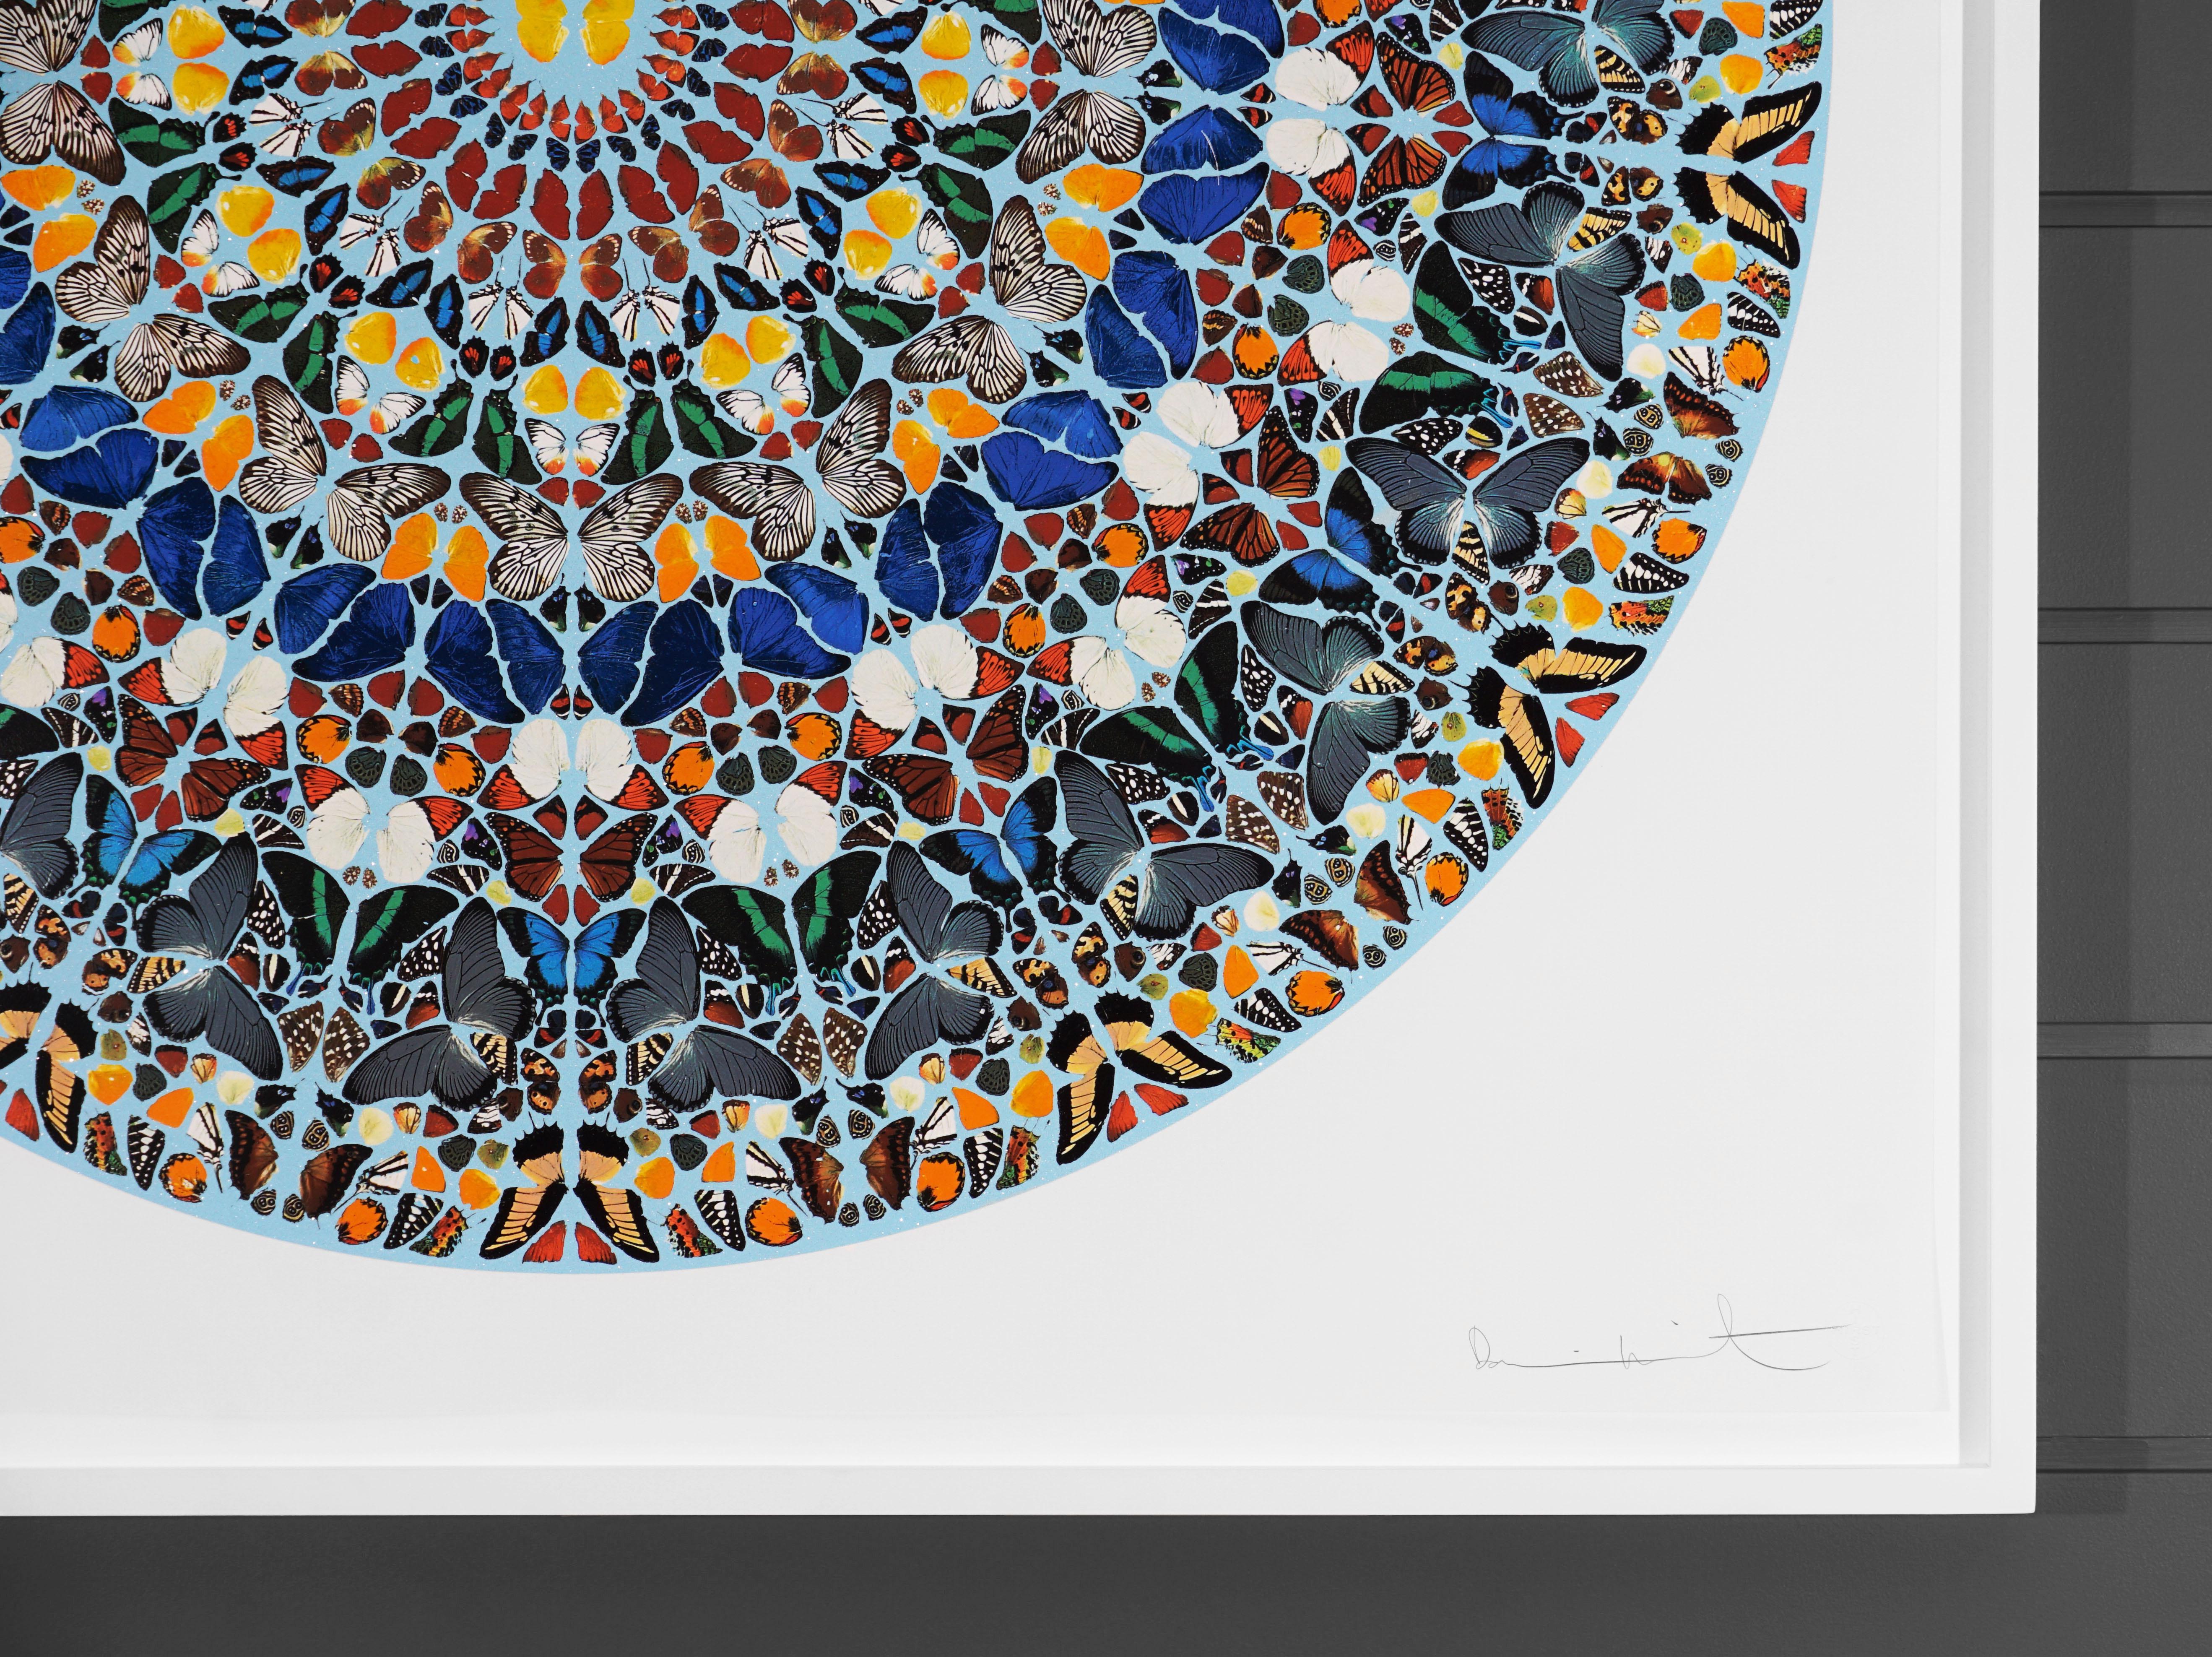 Damien Hirst, 'Mantra' Butterfly Kaleidoscope with Diamond Dust, 2011 5